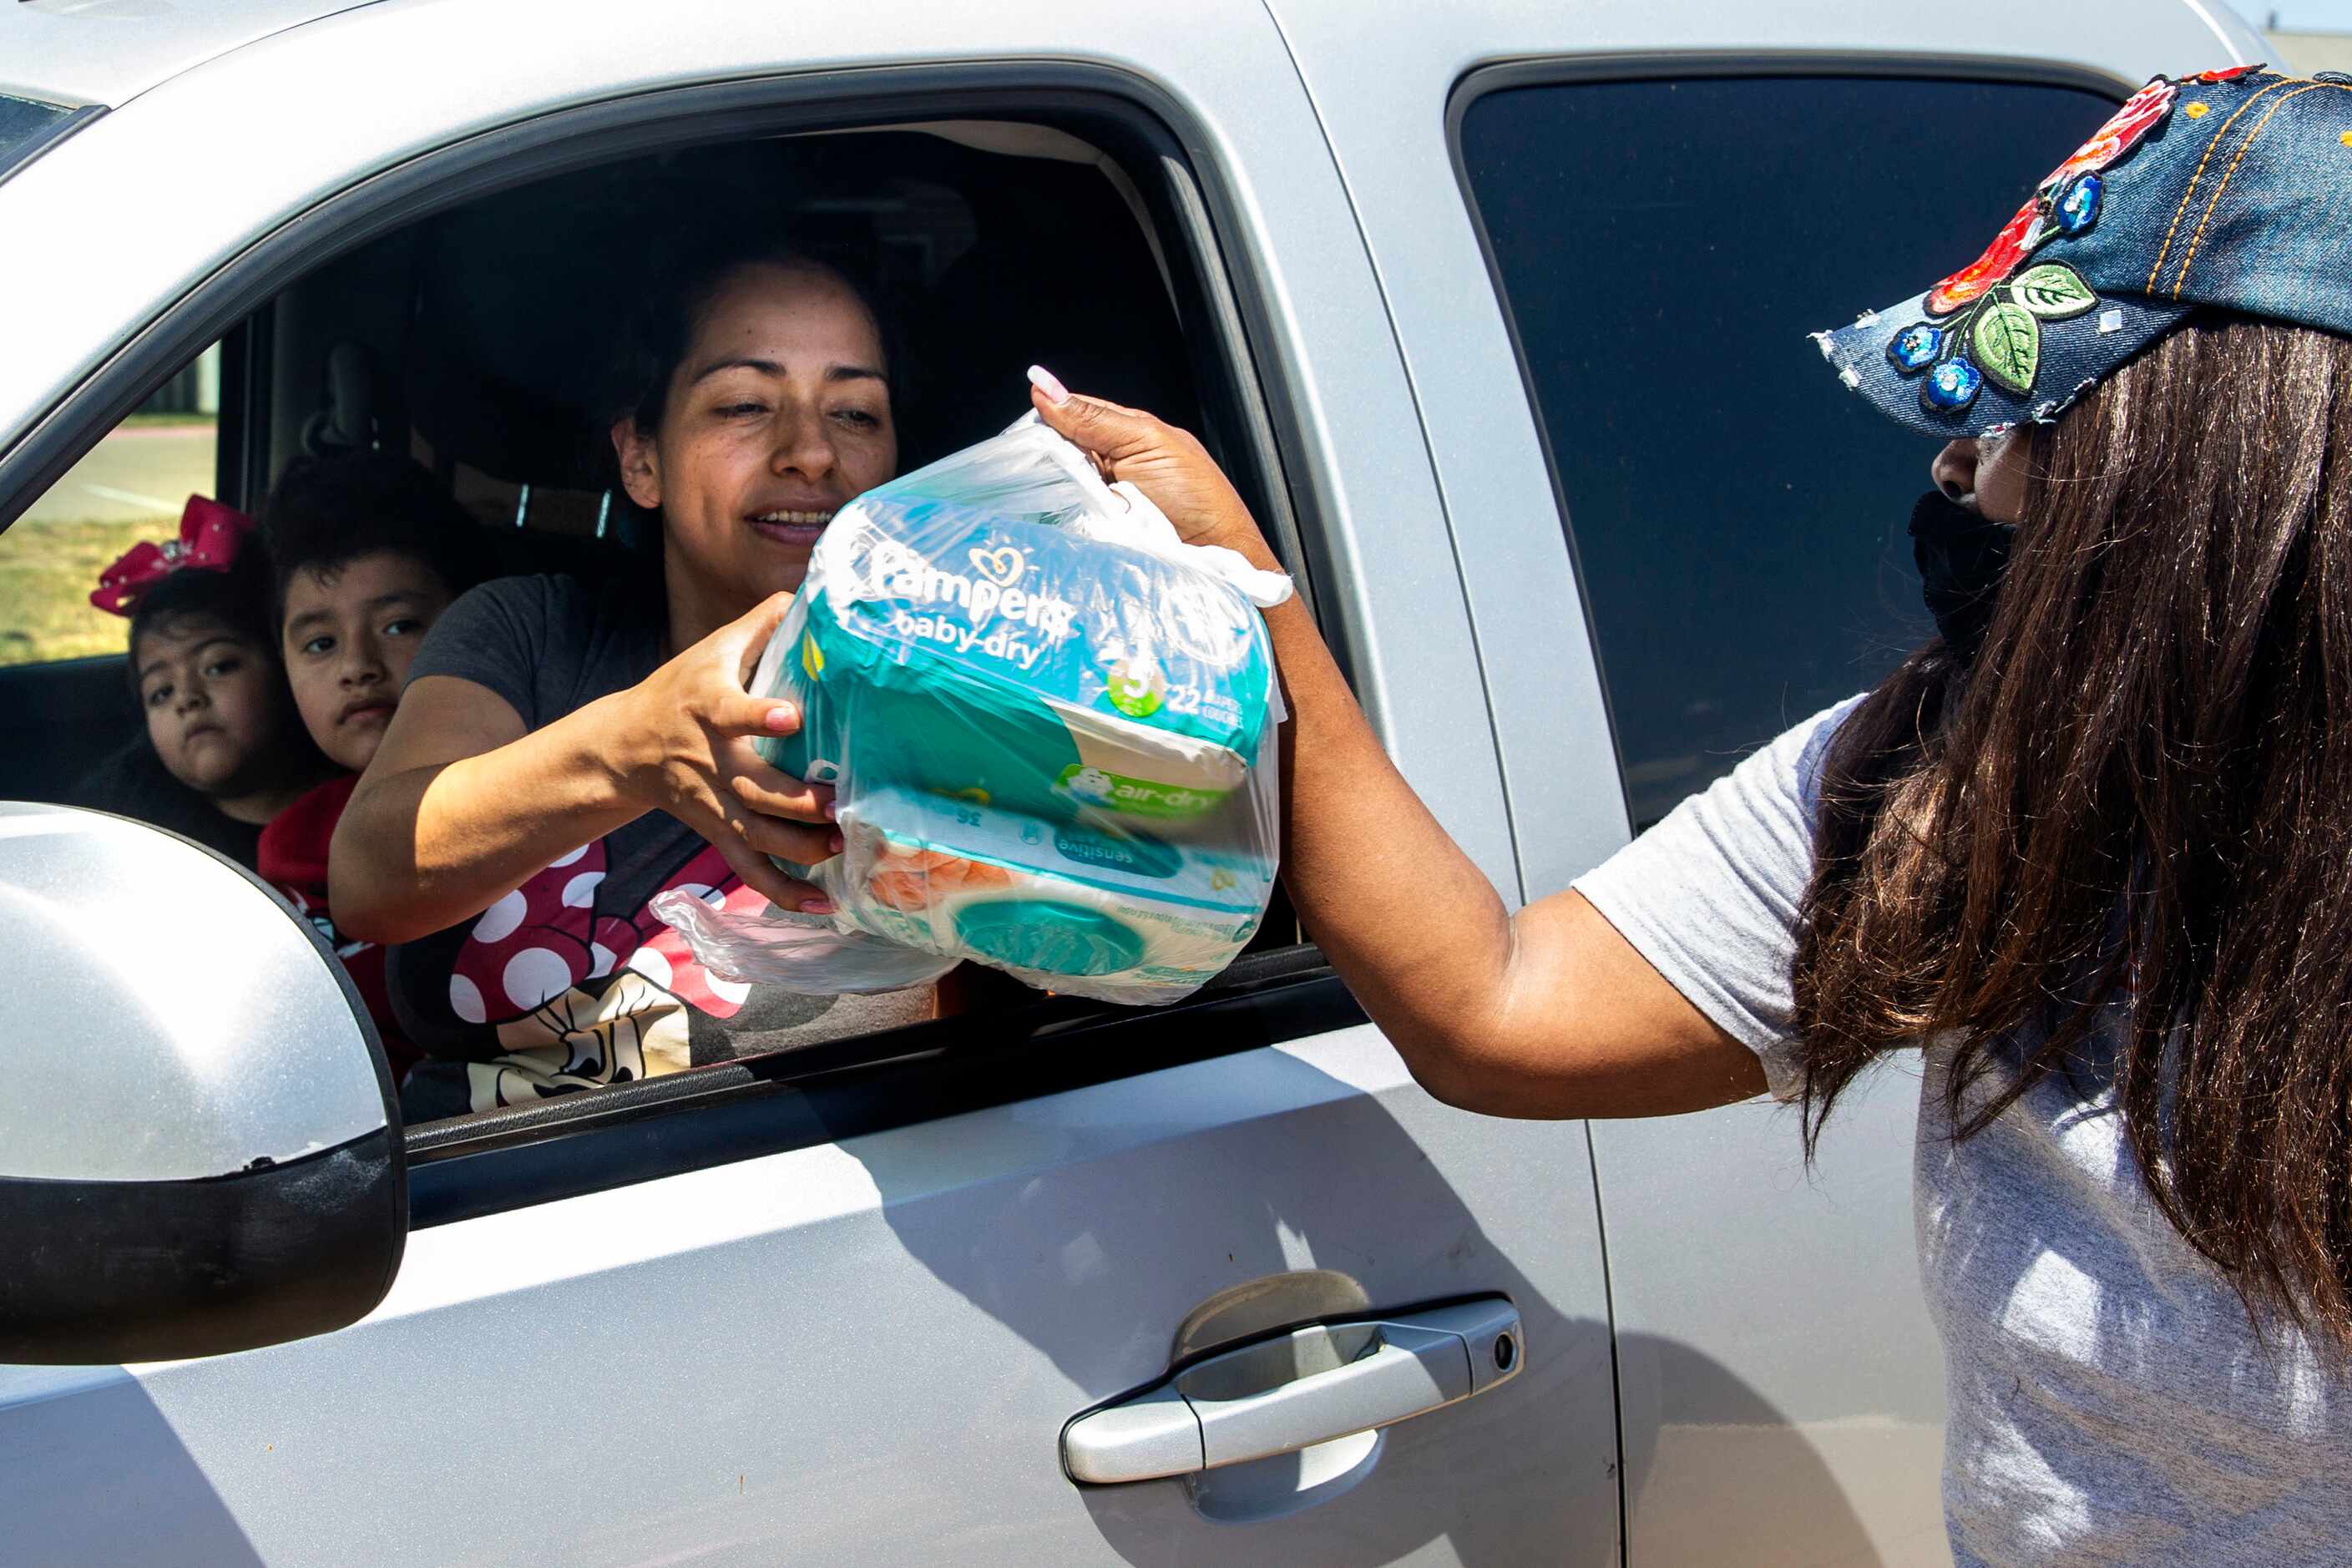 President and founder Alexandrea Crutcher-Horsley (right) hands diapers to Xochitl Zuniga...